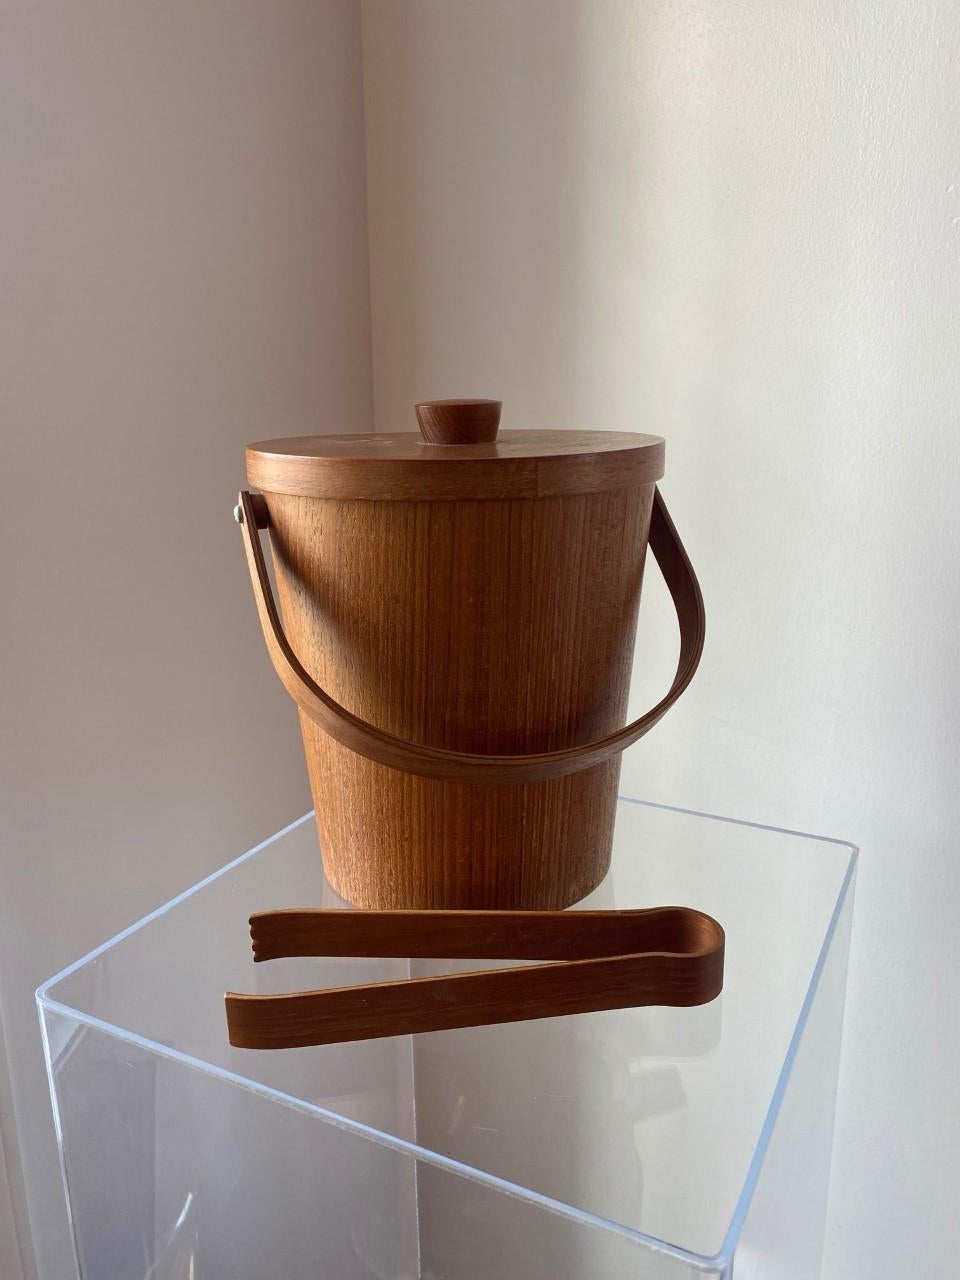 Unique and beautifully crafted Danish midcentury teak ice bucket. This piece has minimal, clean lines while enveloped in the grain of teak with the insert of aluminum. The piece comes with original set of ice tongs. Linear in shape but rich in